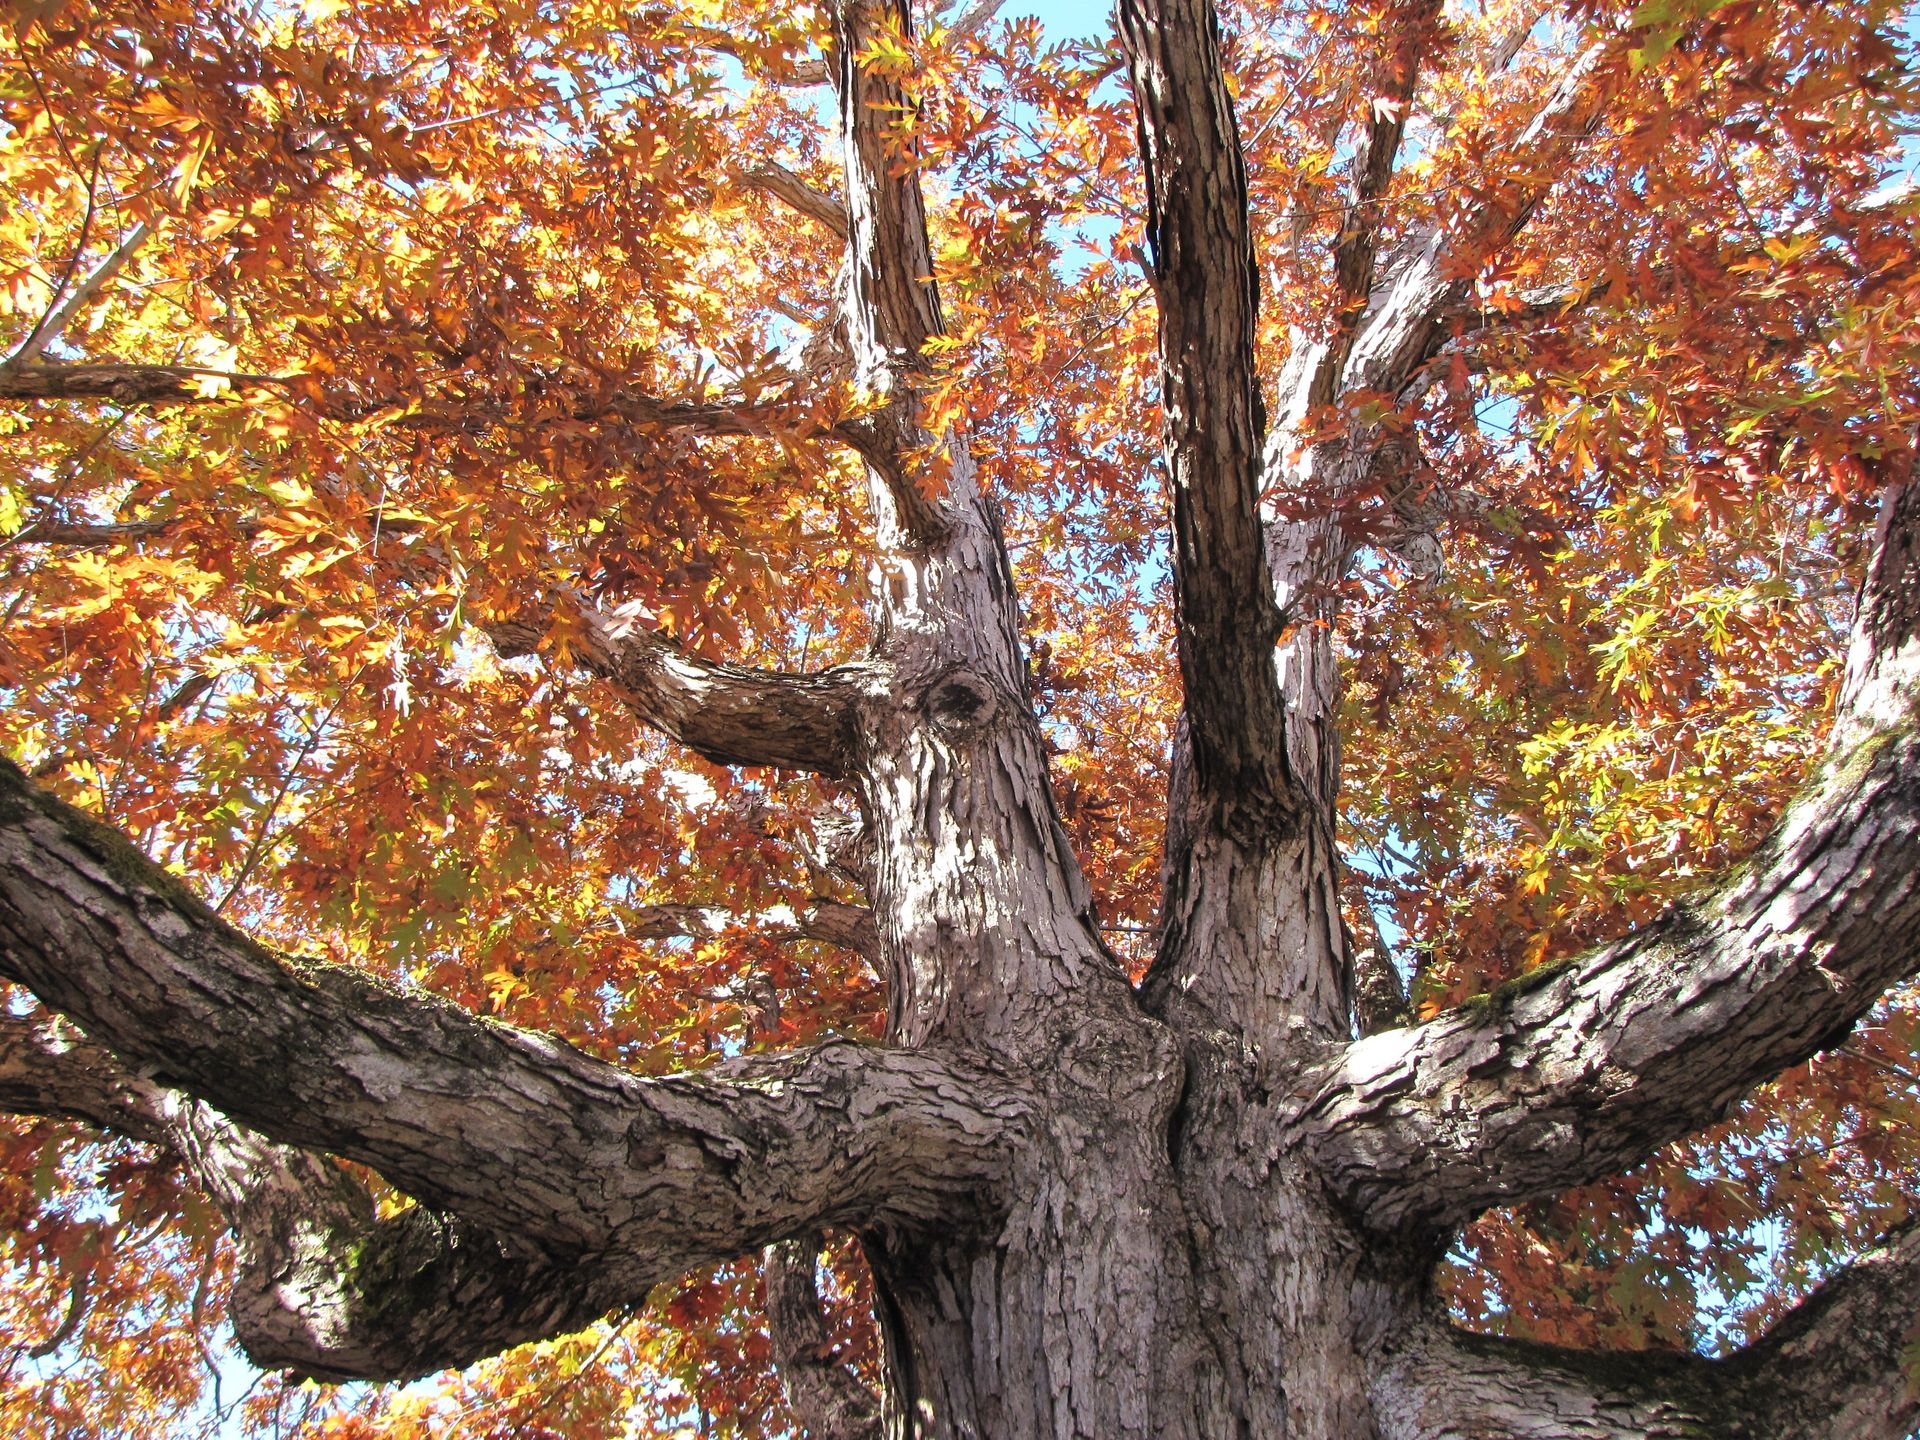 A large tree turns yellow and orange in the autumn.